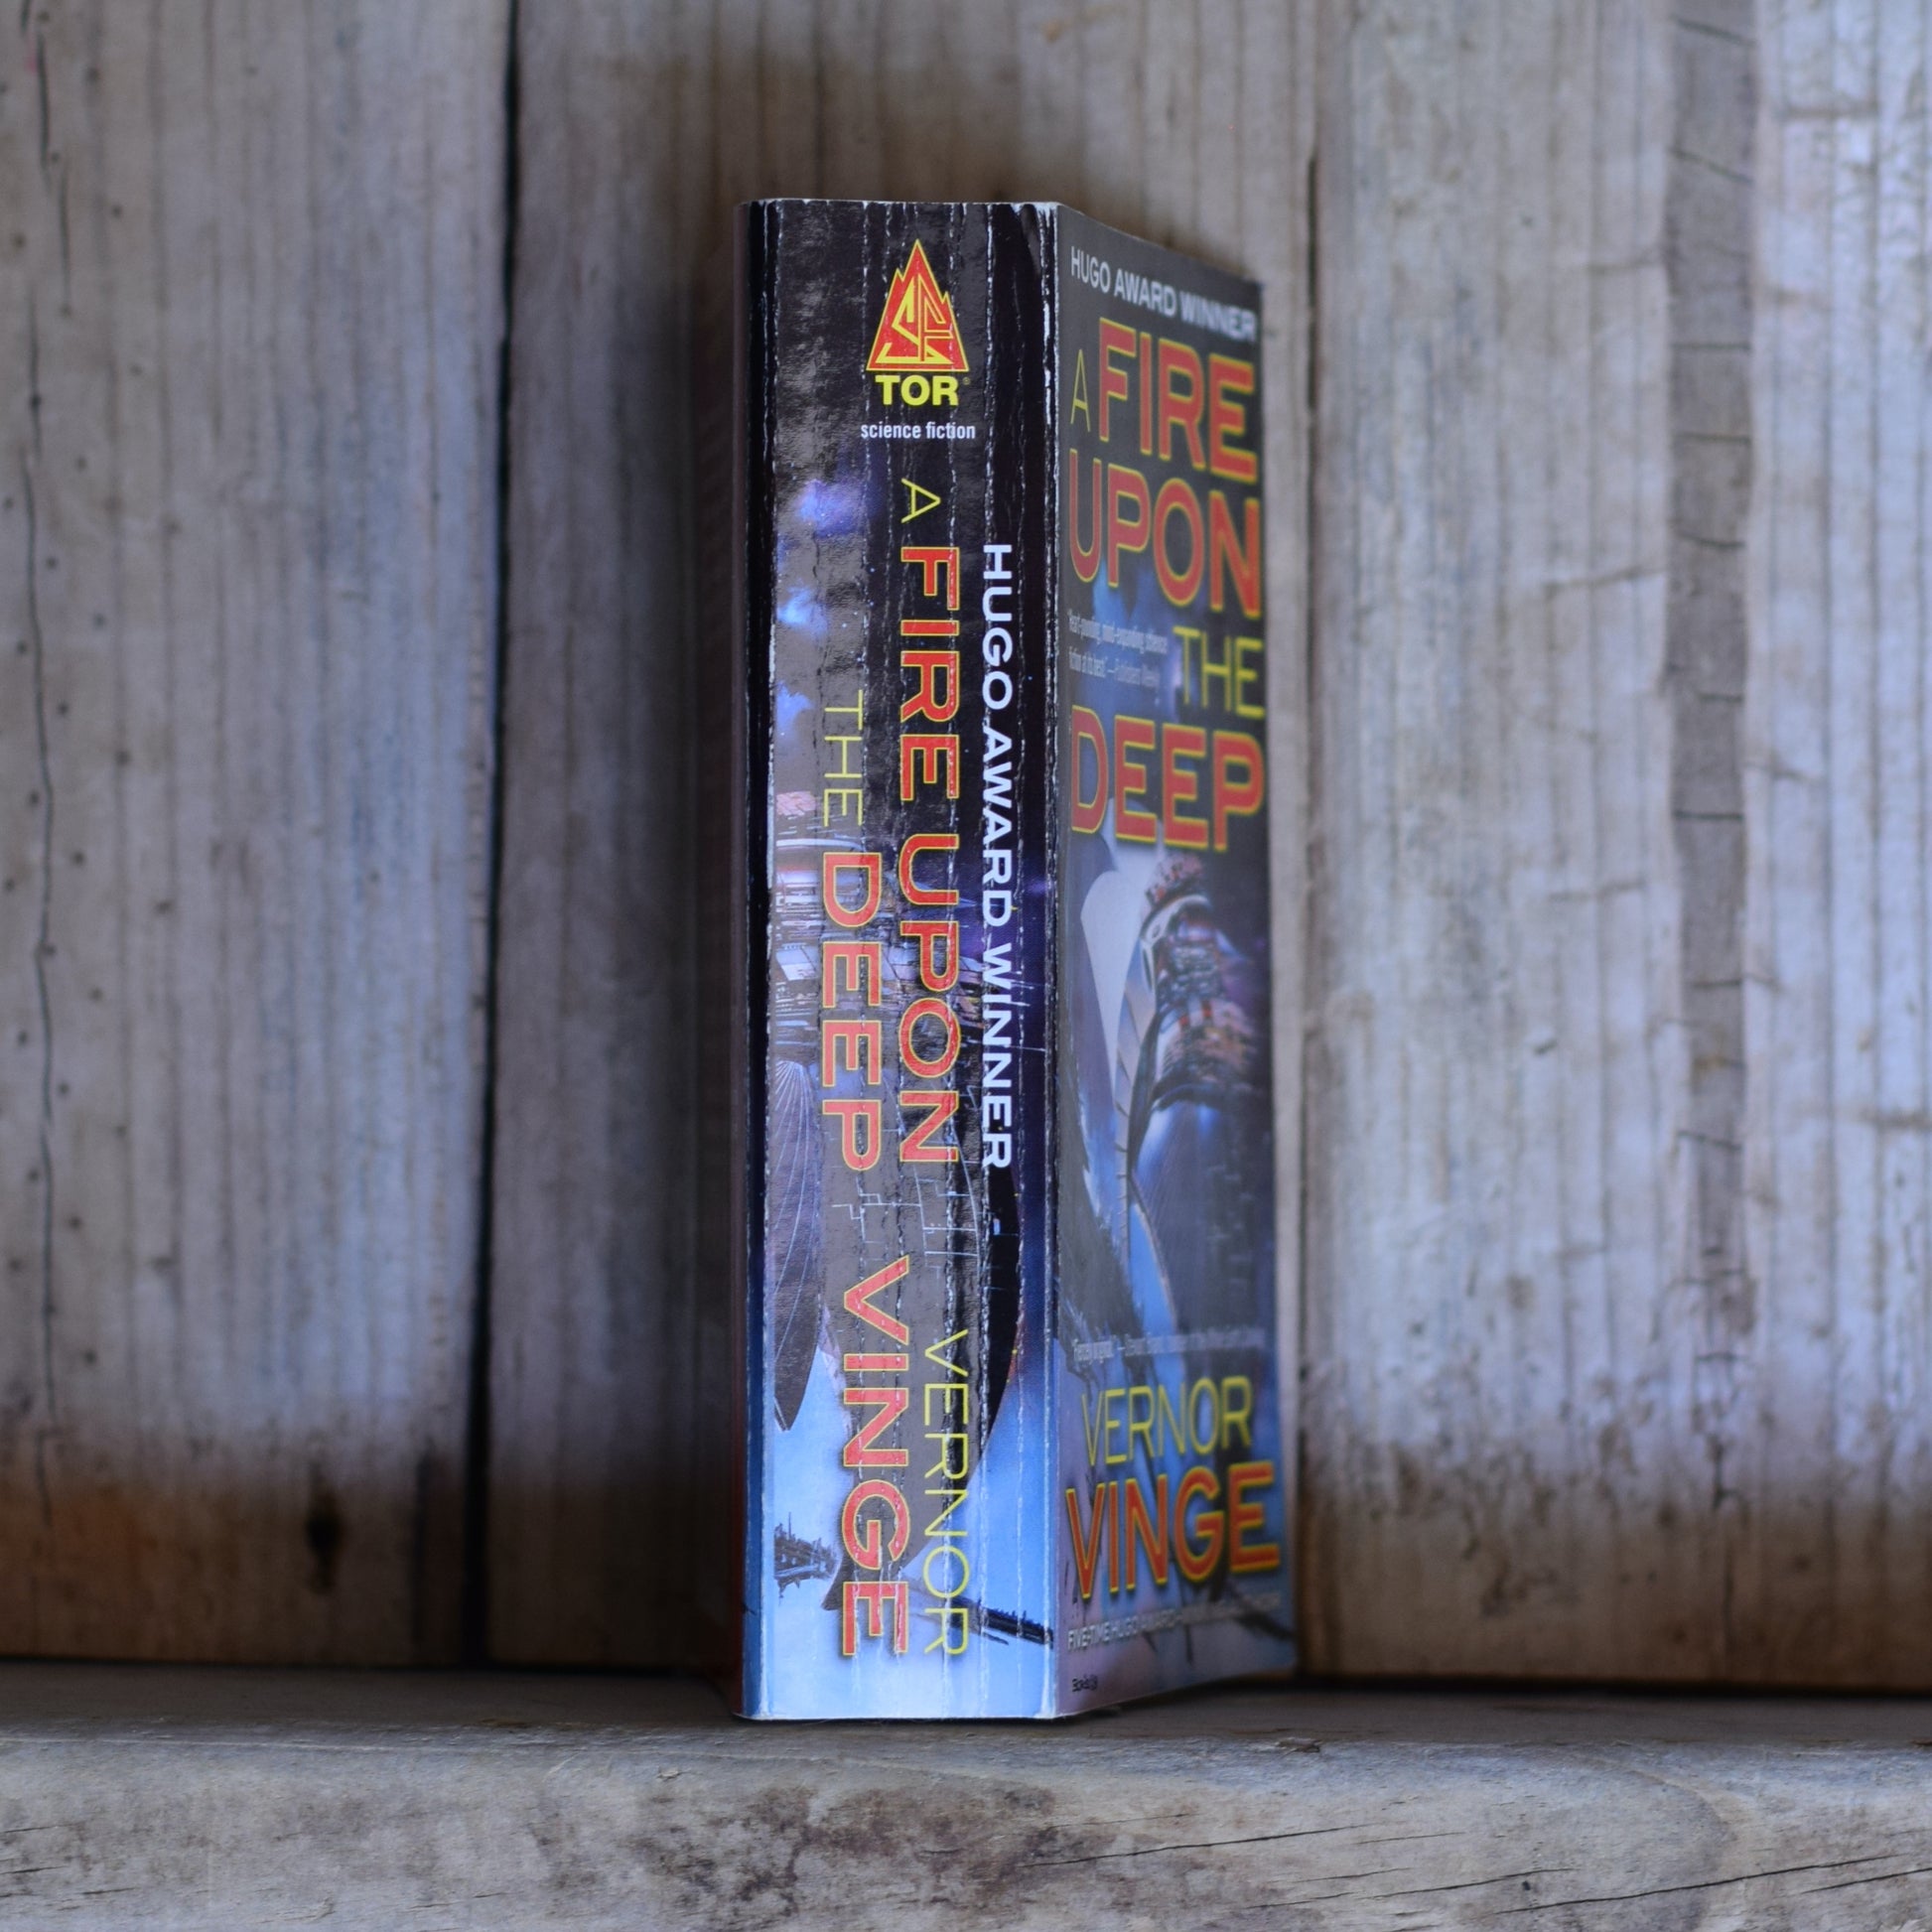 A Fire Upon the Deep - Vernor Vinge - 1993 Foil Embossed Tor Books Pap –  Postmarked from the Stars